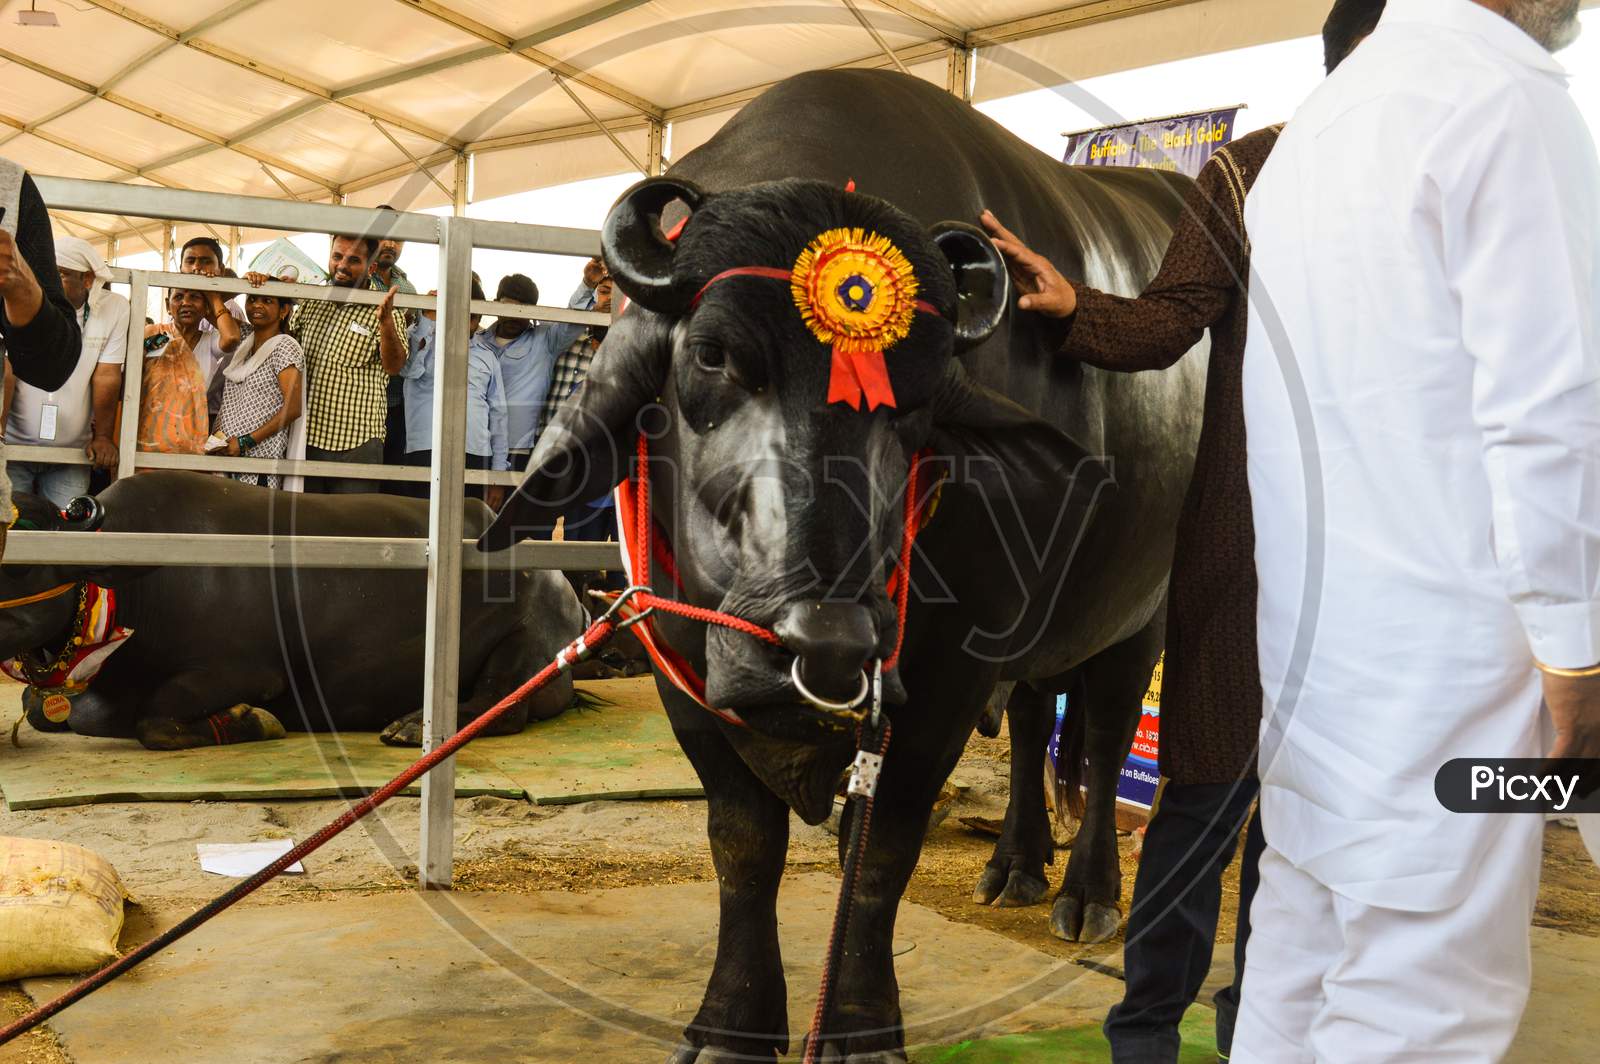 The Big Indian Male Buffalo Who Is Showcasing For Agriculture Fair, This Big Male Indian Buffalo Is So Rich,His Fertility Is So Good To Produce Baby Buffalo, Clean Shaved And Need Massage Everyday.